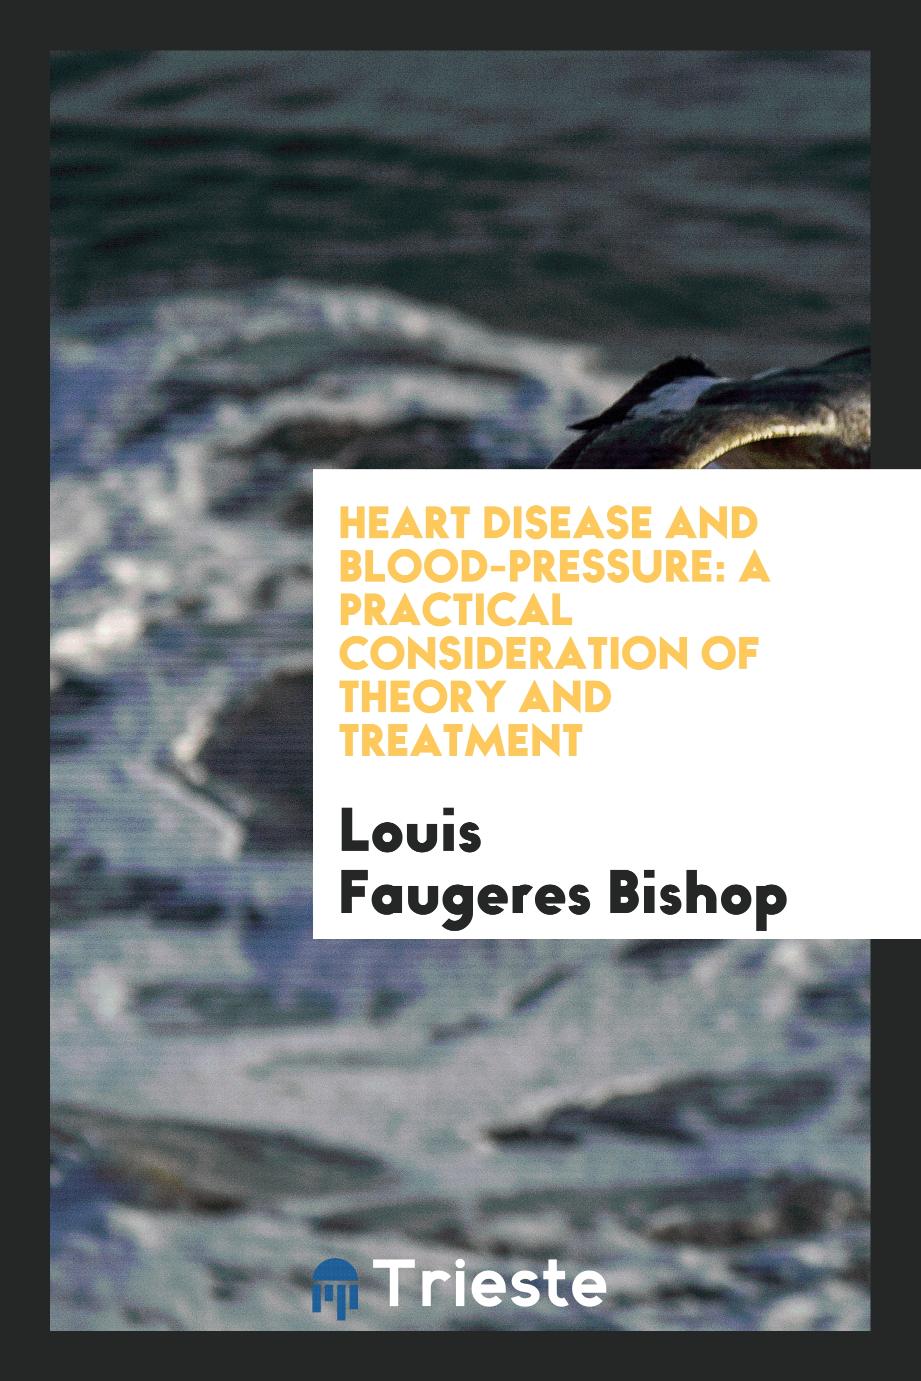 Heart Disease and Blood-Pressure: A Practical Consideration of Theory and Treatment